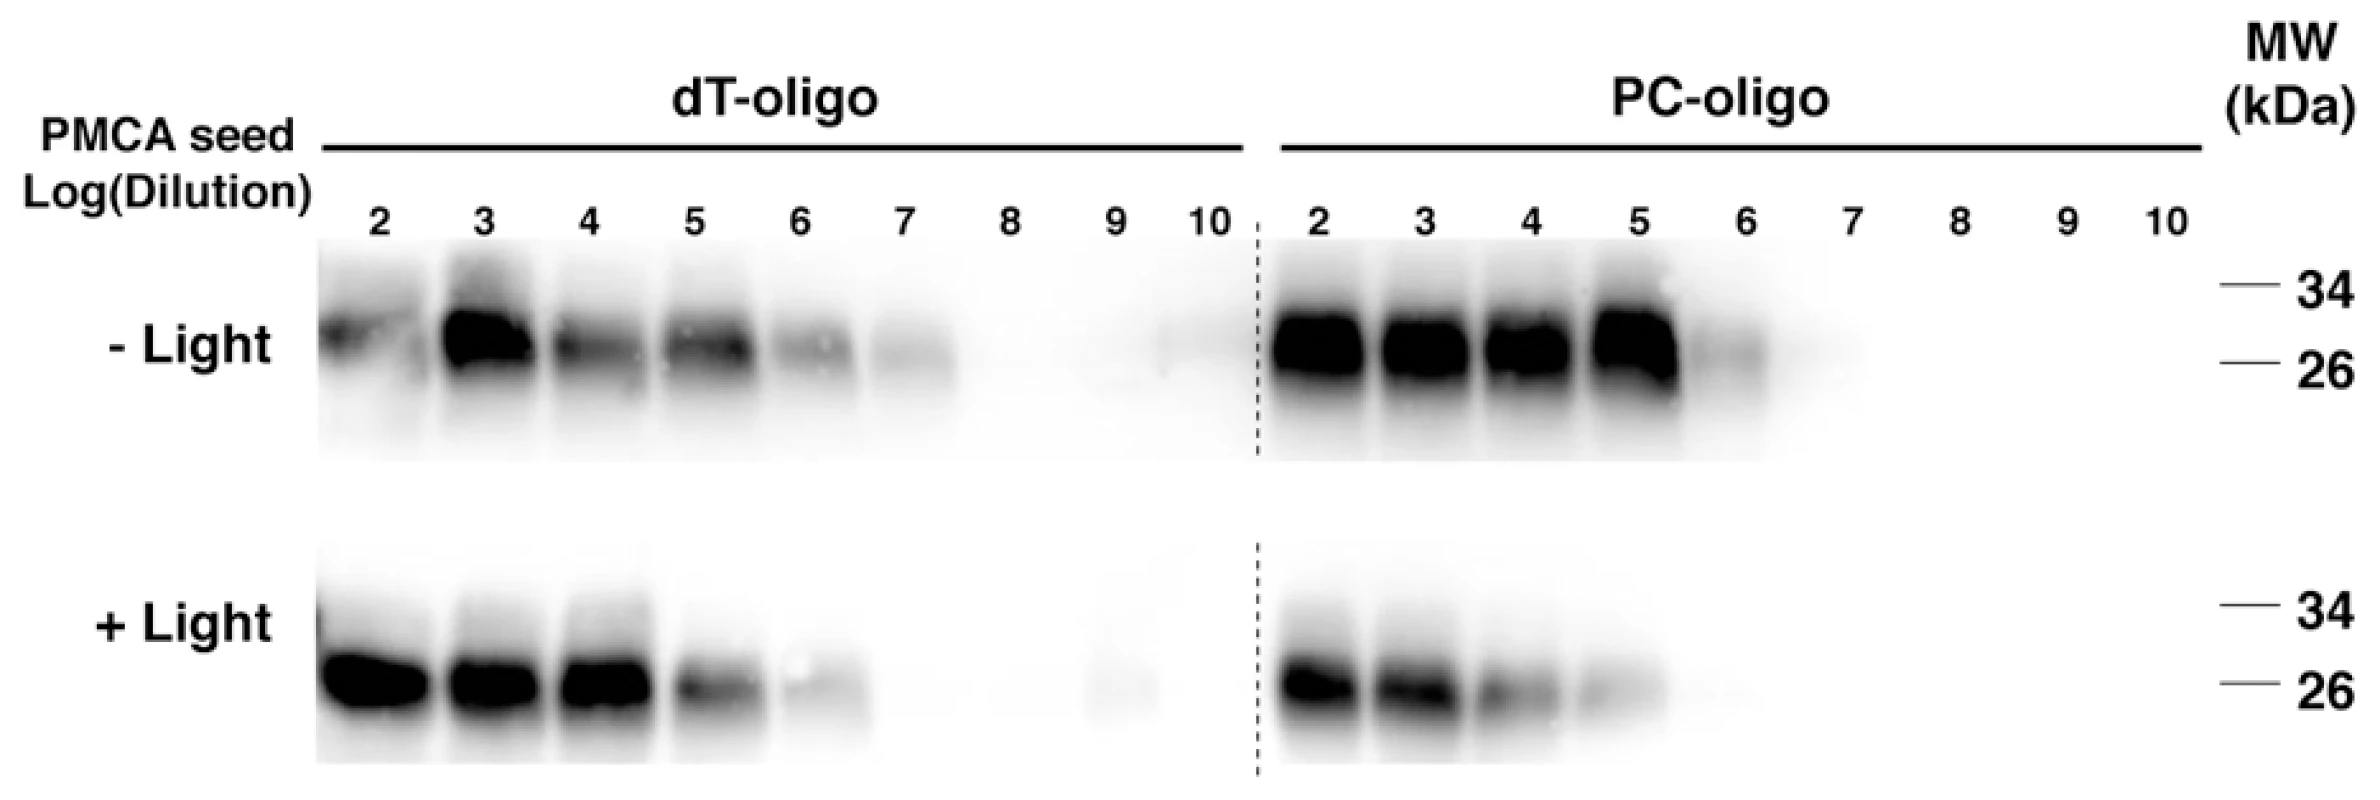 Western blot showing the final samples from 3 round sPMCA reactions.